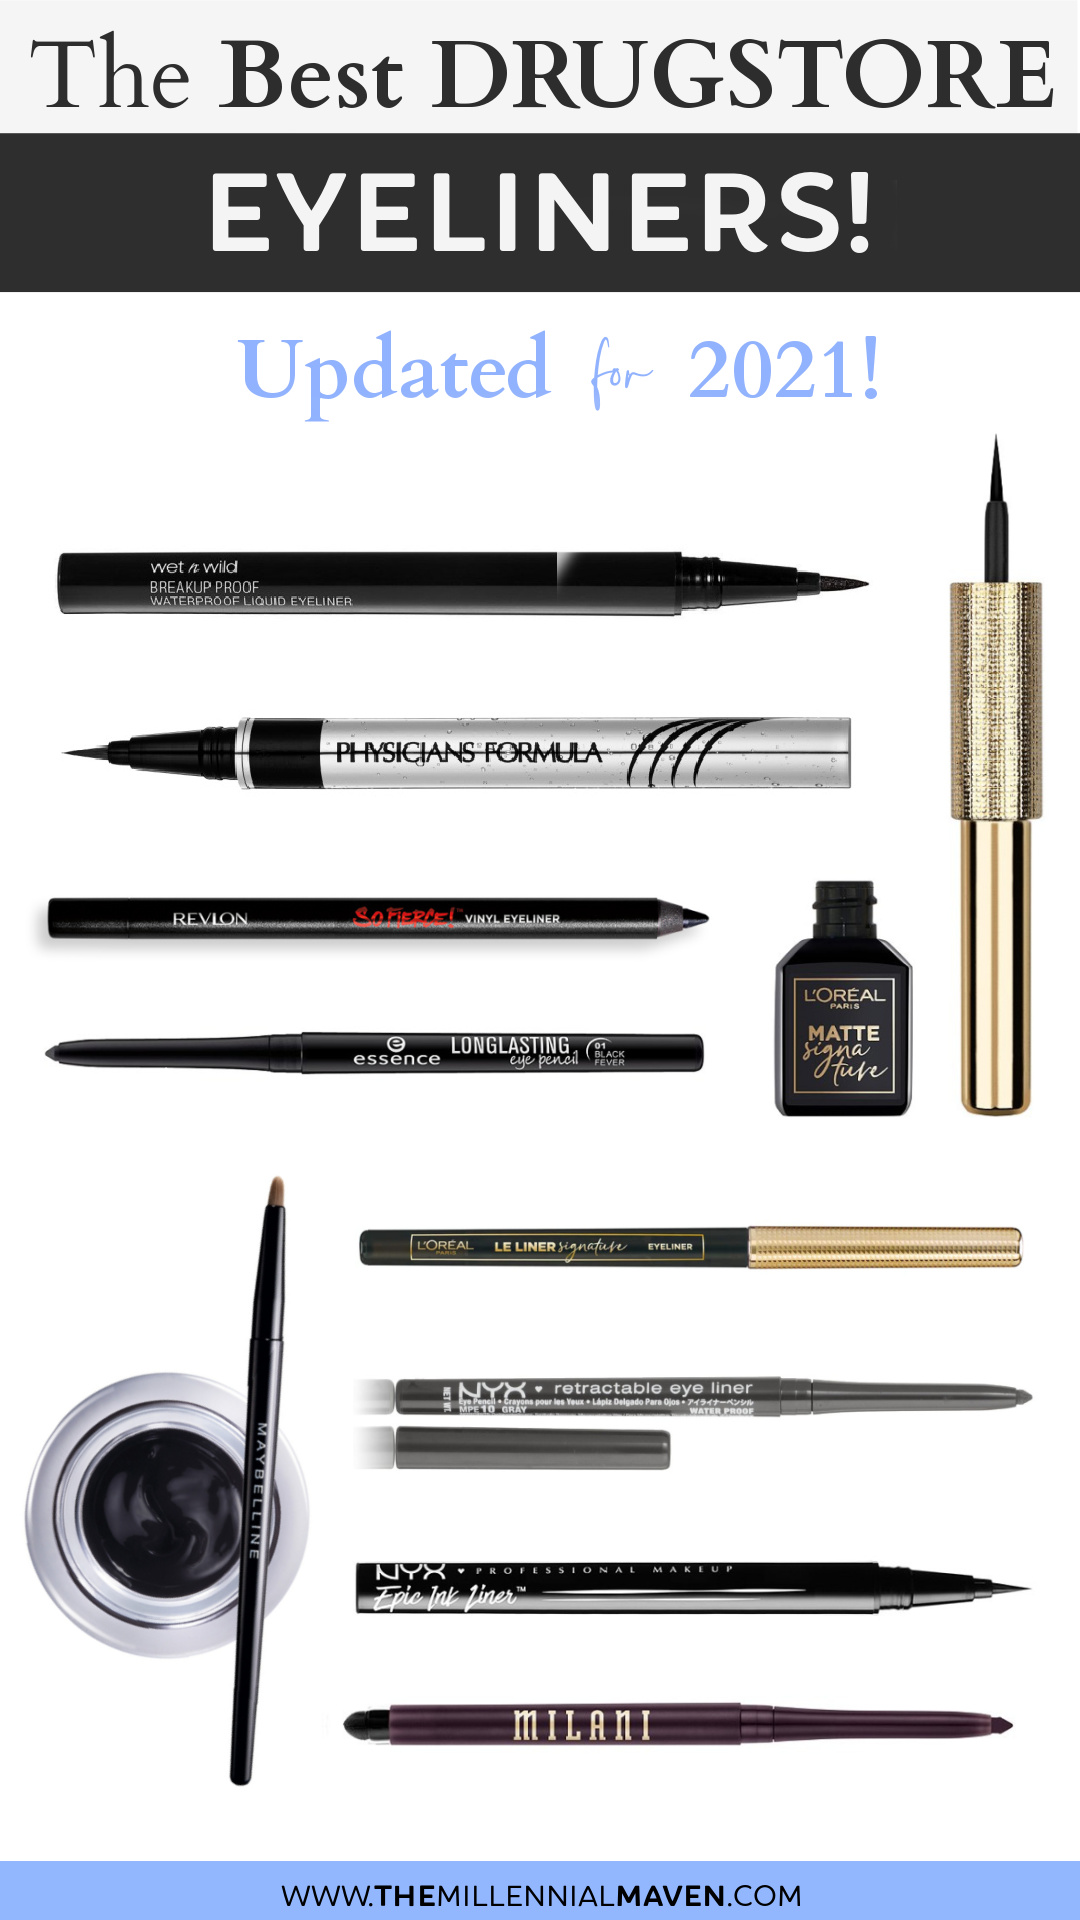 Top 10 Eyeliners at the Drugstore in 2022! | Best Eyeliners | The Millennial Maven